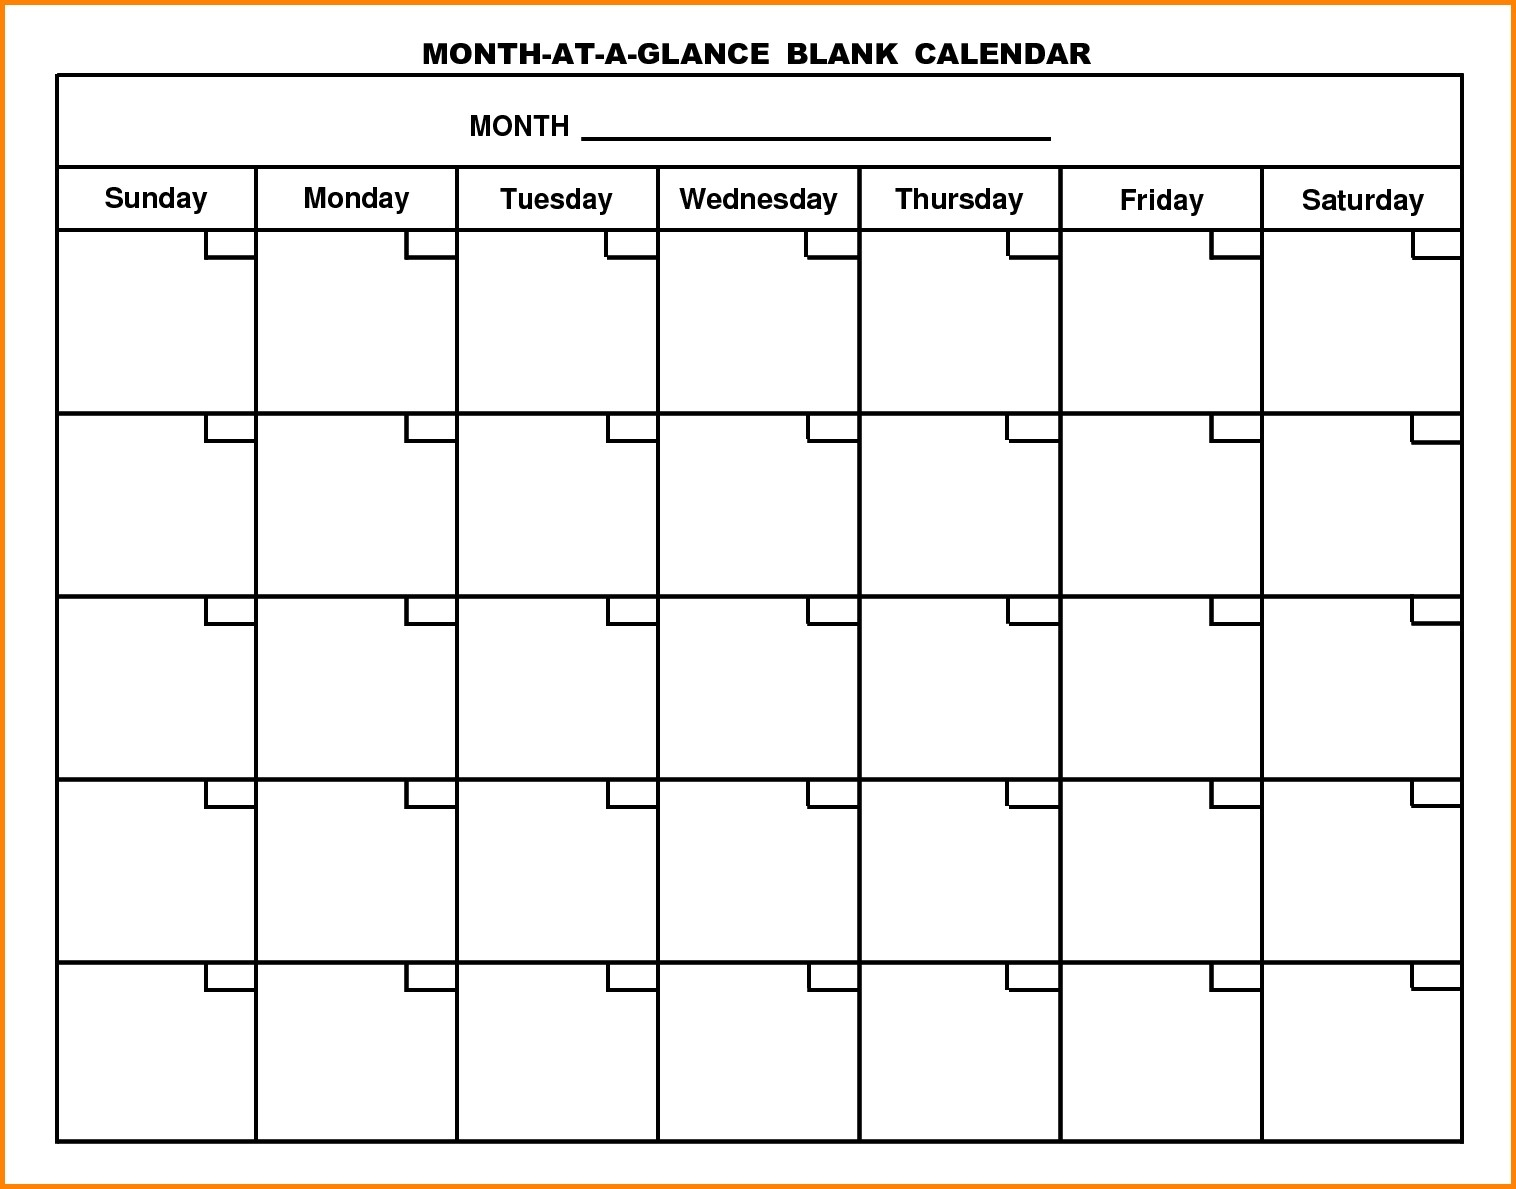 Month At A Glance Blank Calendar Printable | Monthly Pertaining To Month At A Glance Blank Calendar Template